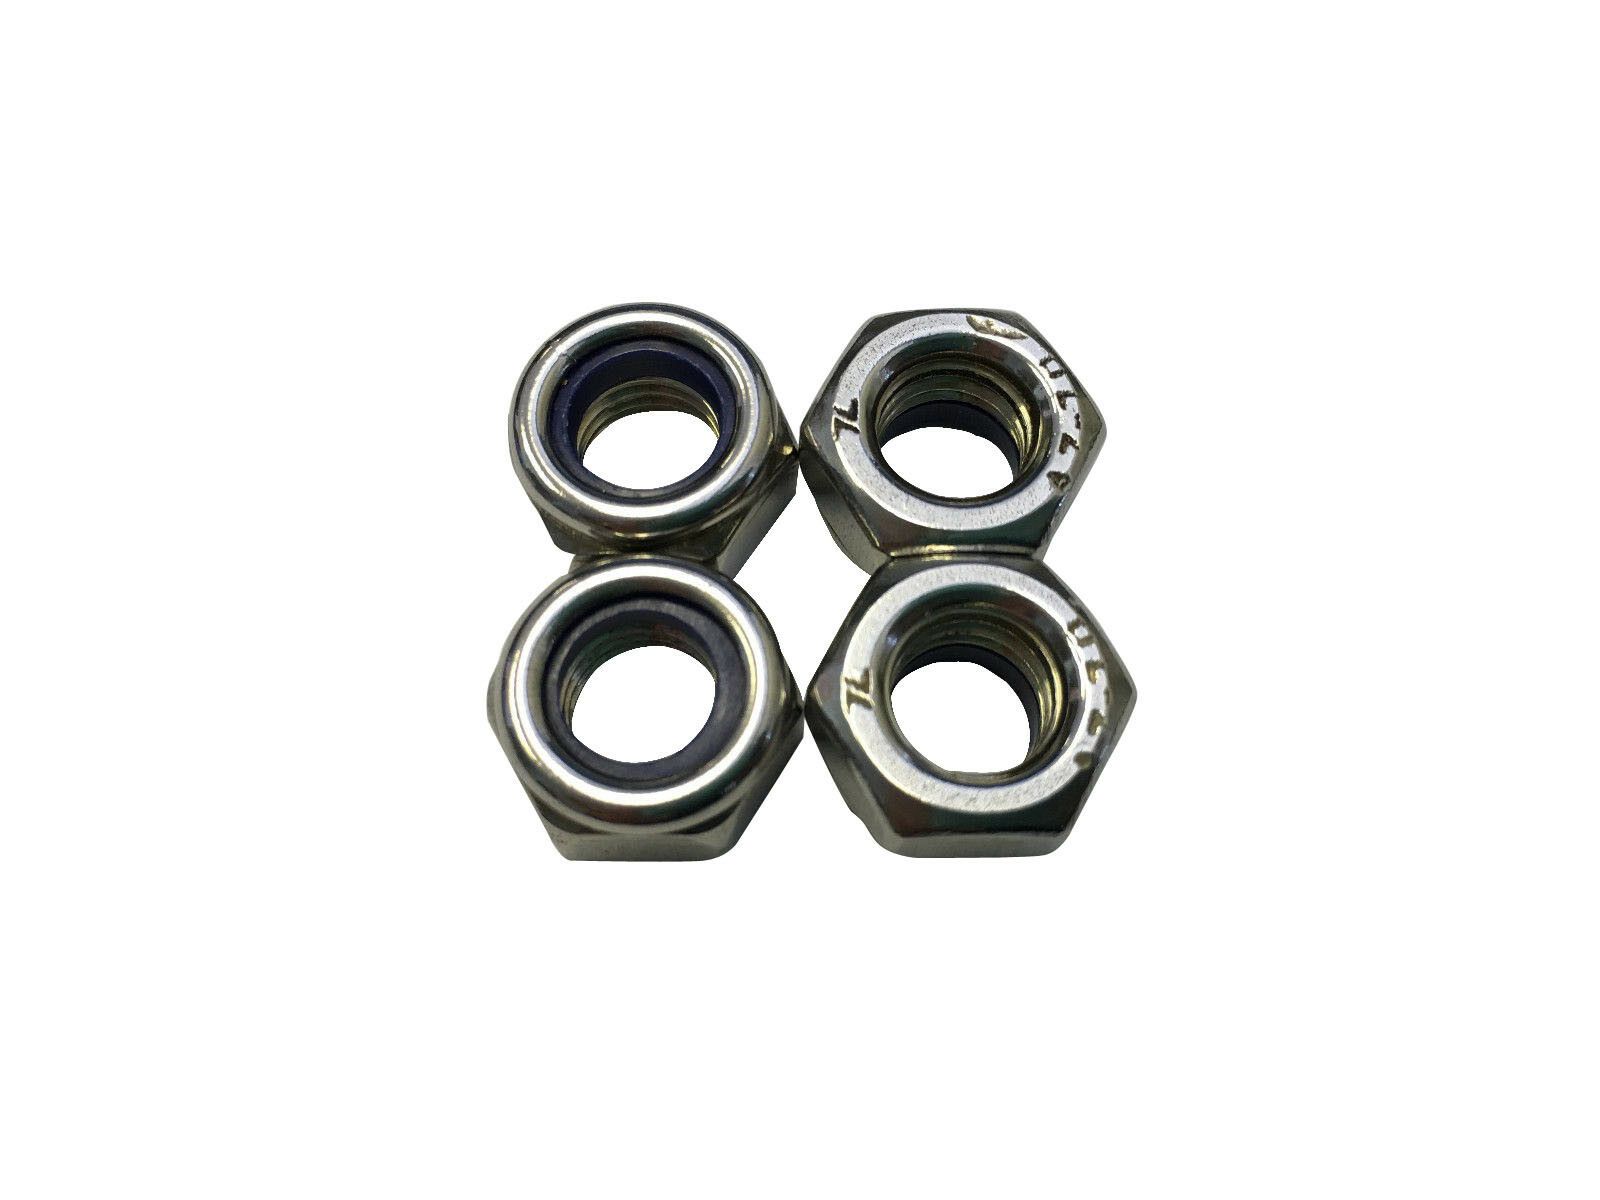 Metric Lock Nuts For Motorcycles Scooters General Hardware (4 Pieces)